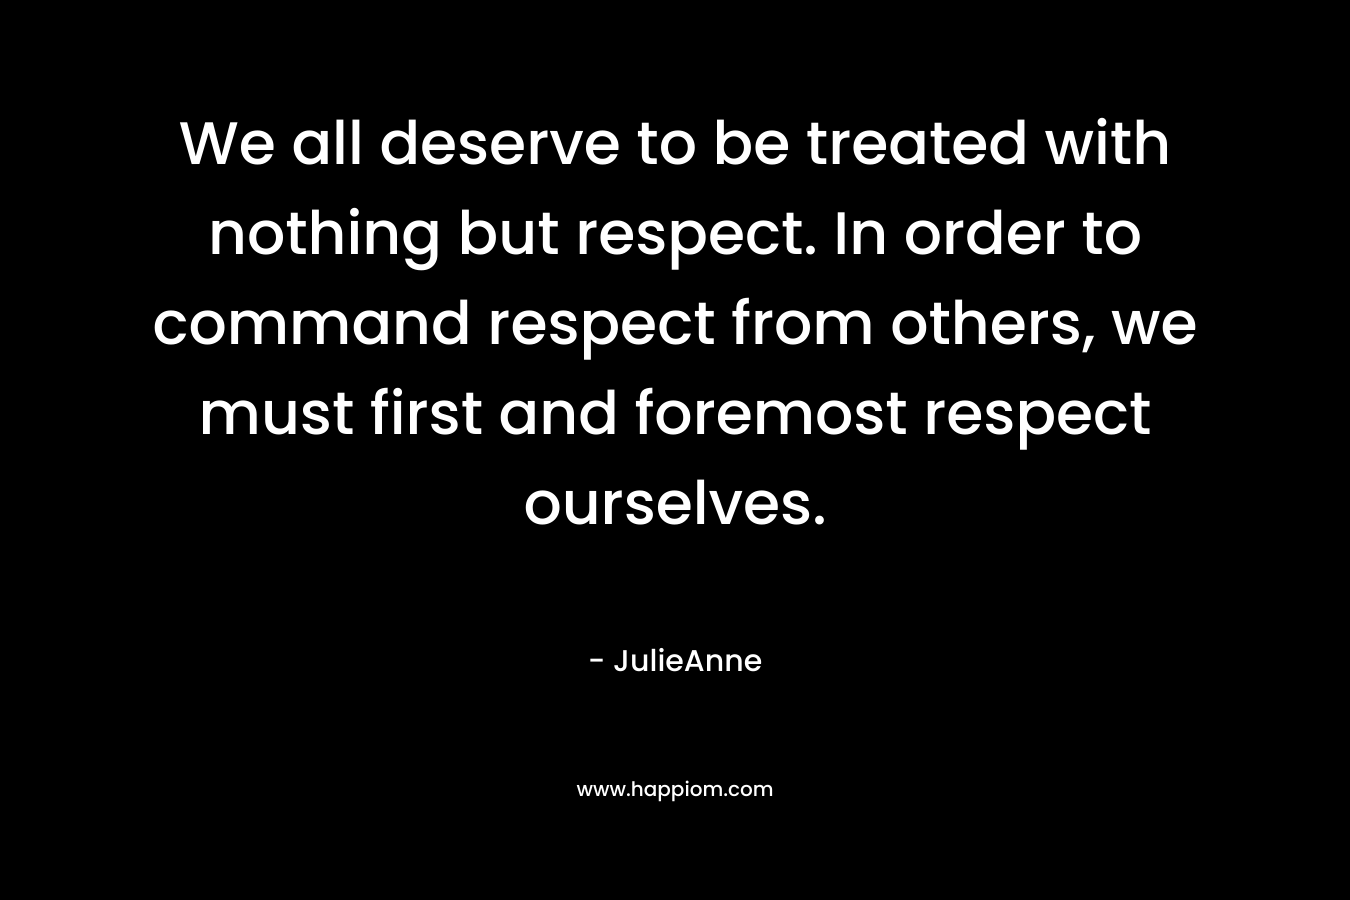 We all deserve to be treated with nothing but respect. In order to command respect from others, we must first and foremost respect ourselves.